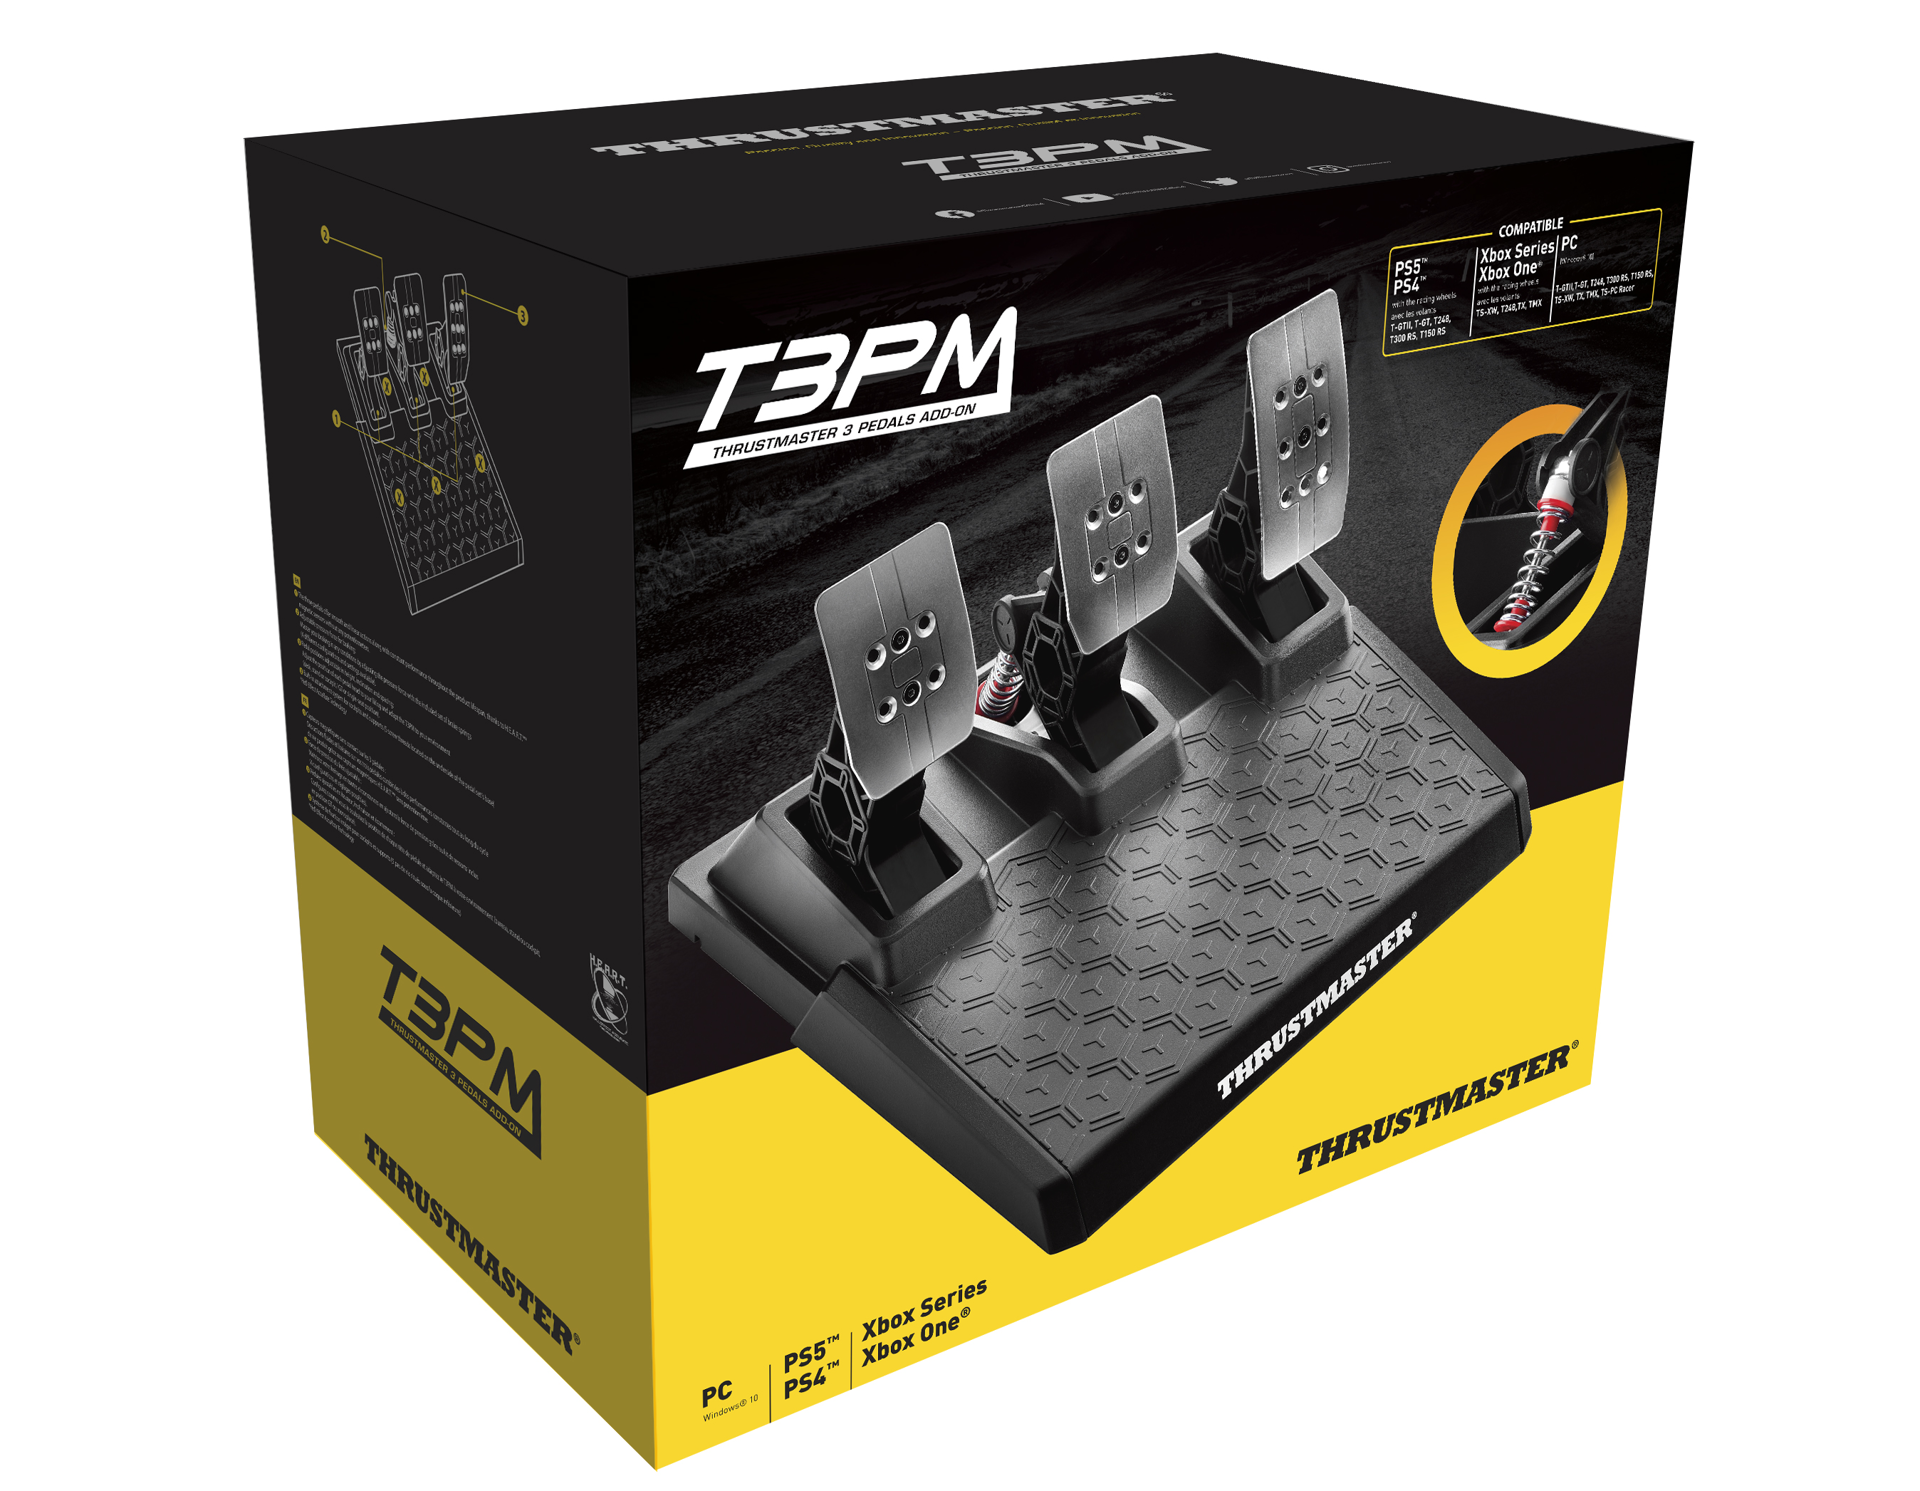 Thrustmaster T3PM 3 Pedals Add-on pour PS5/PS4/ Xbox X|S / PC